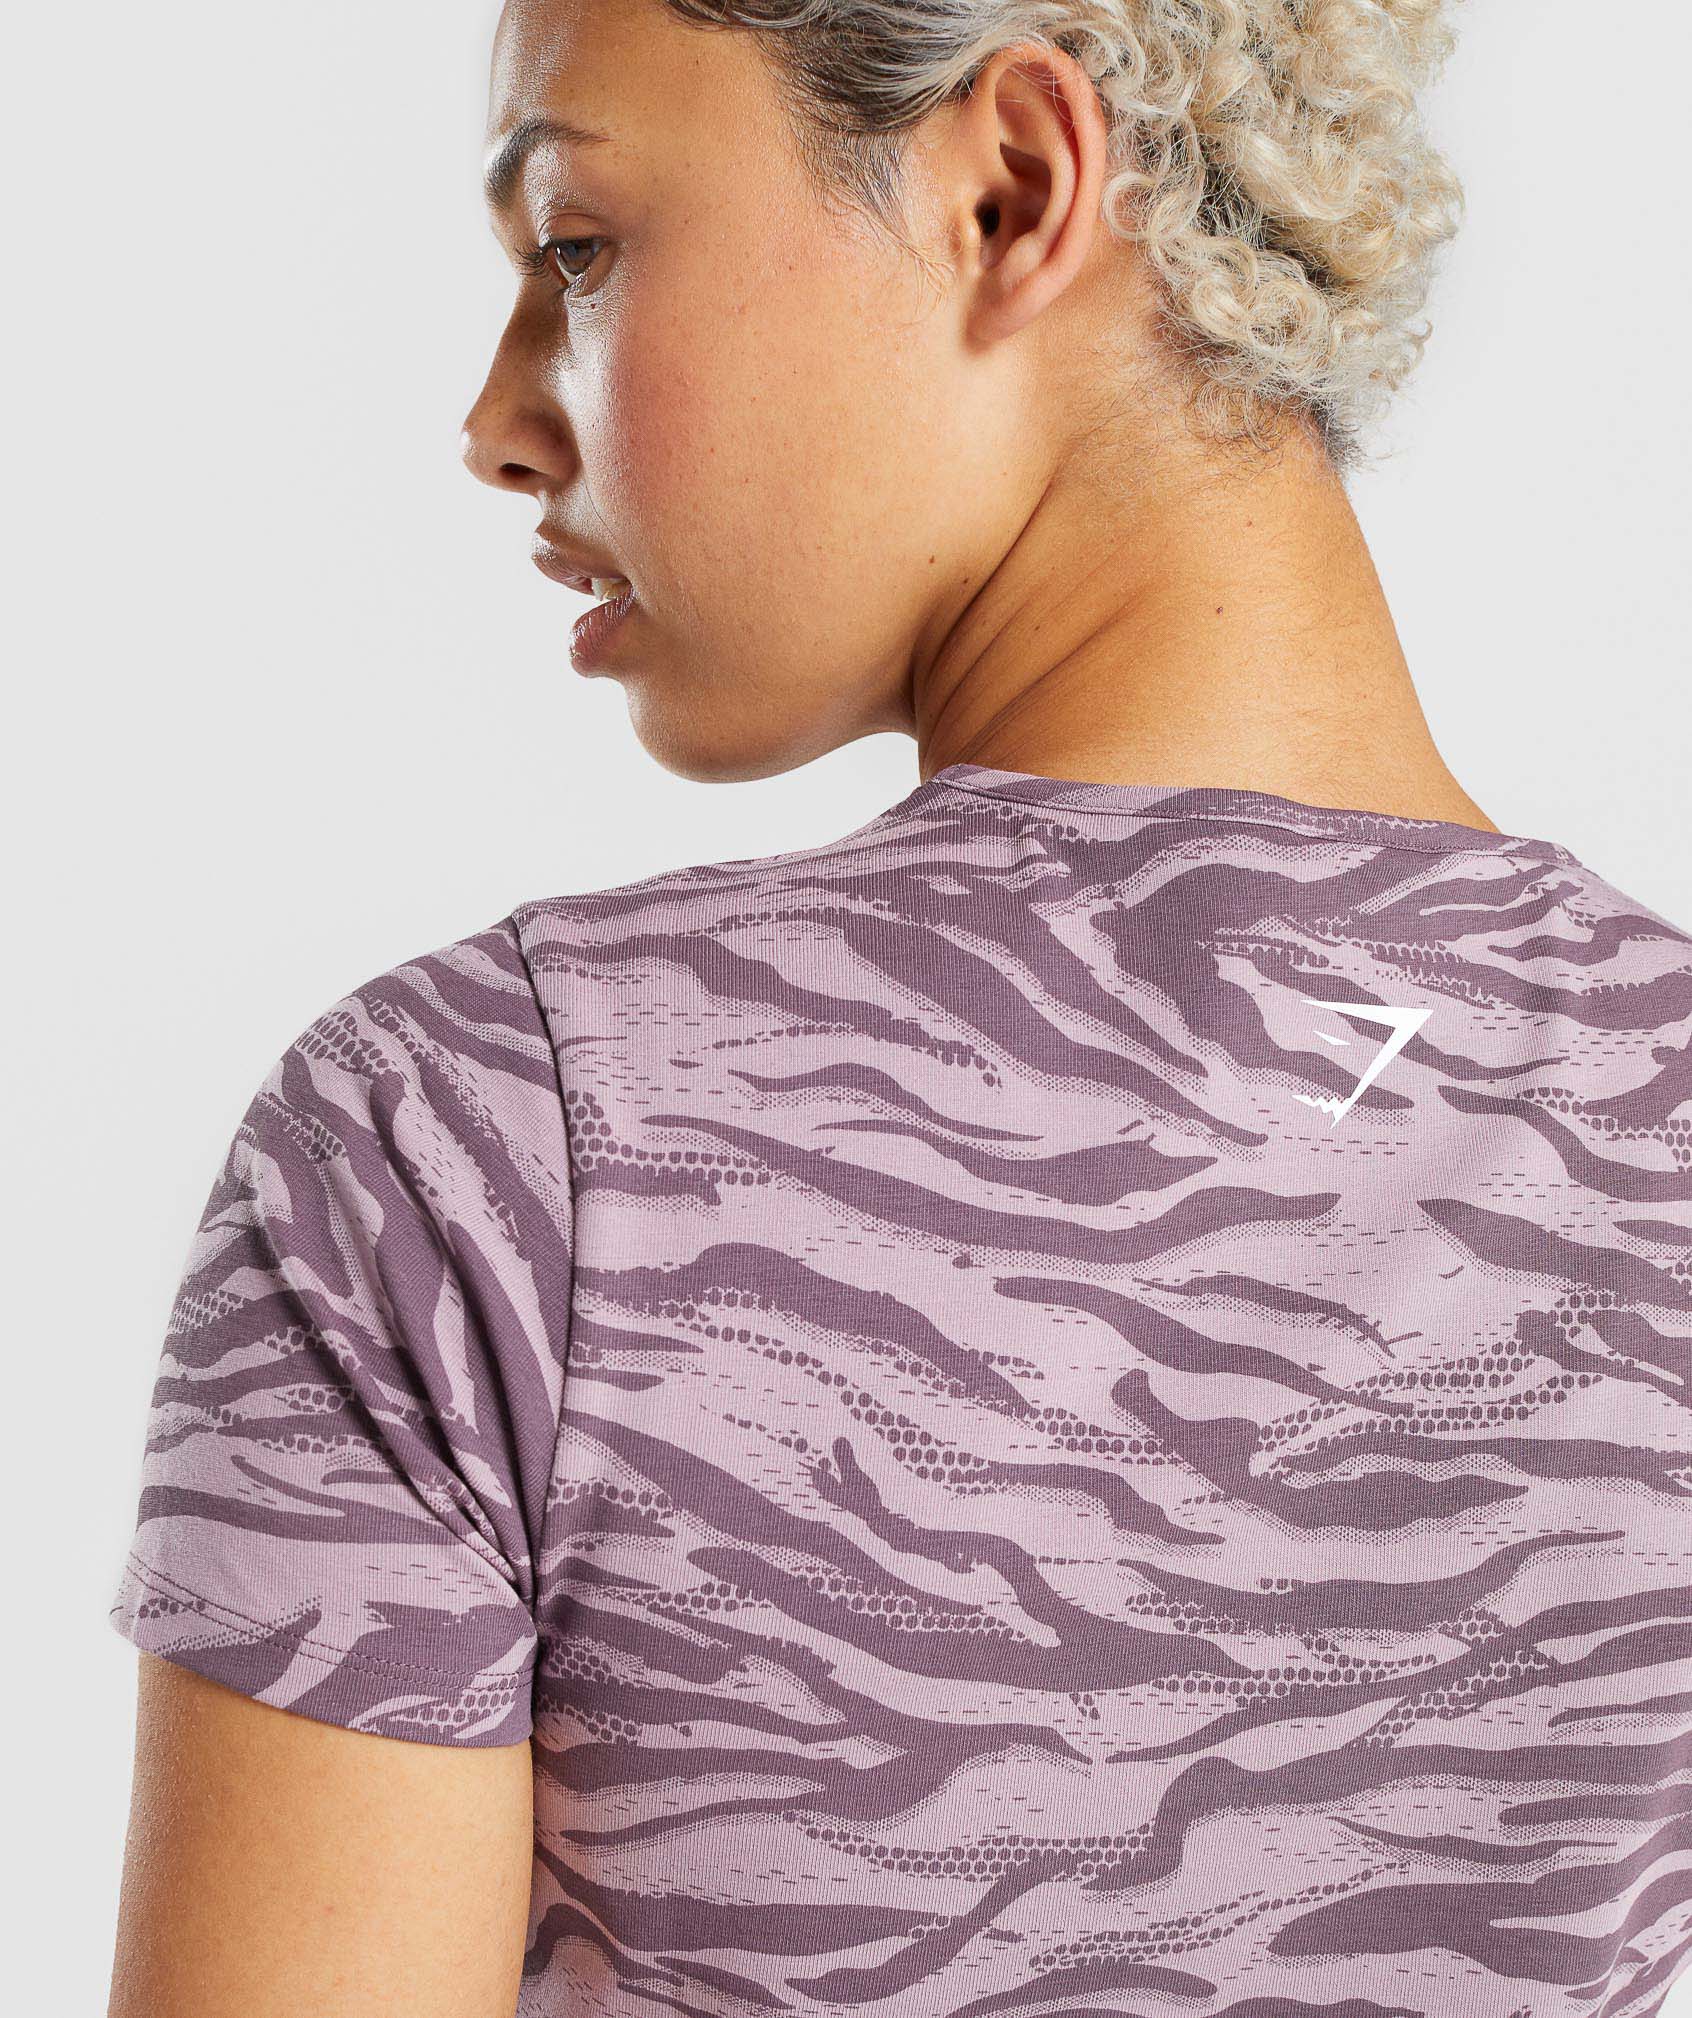 Animal Graphic Crop Top in Purple Print - view 6